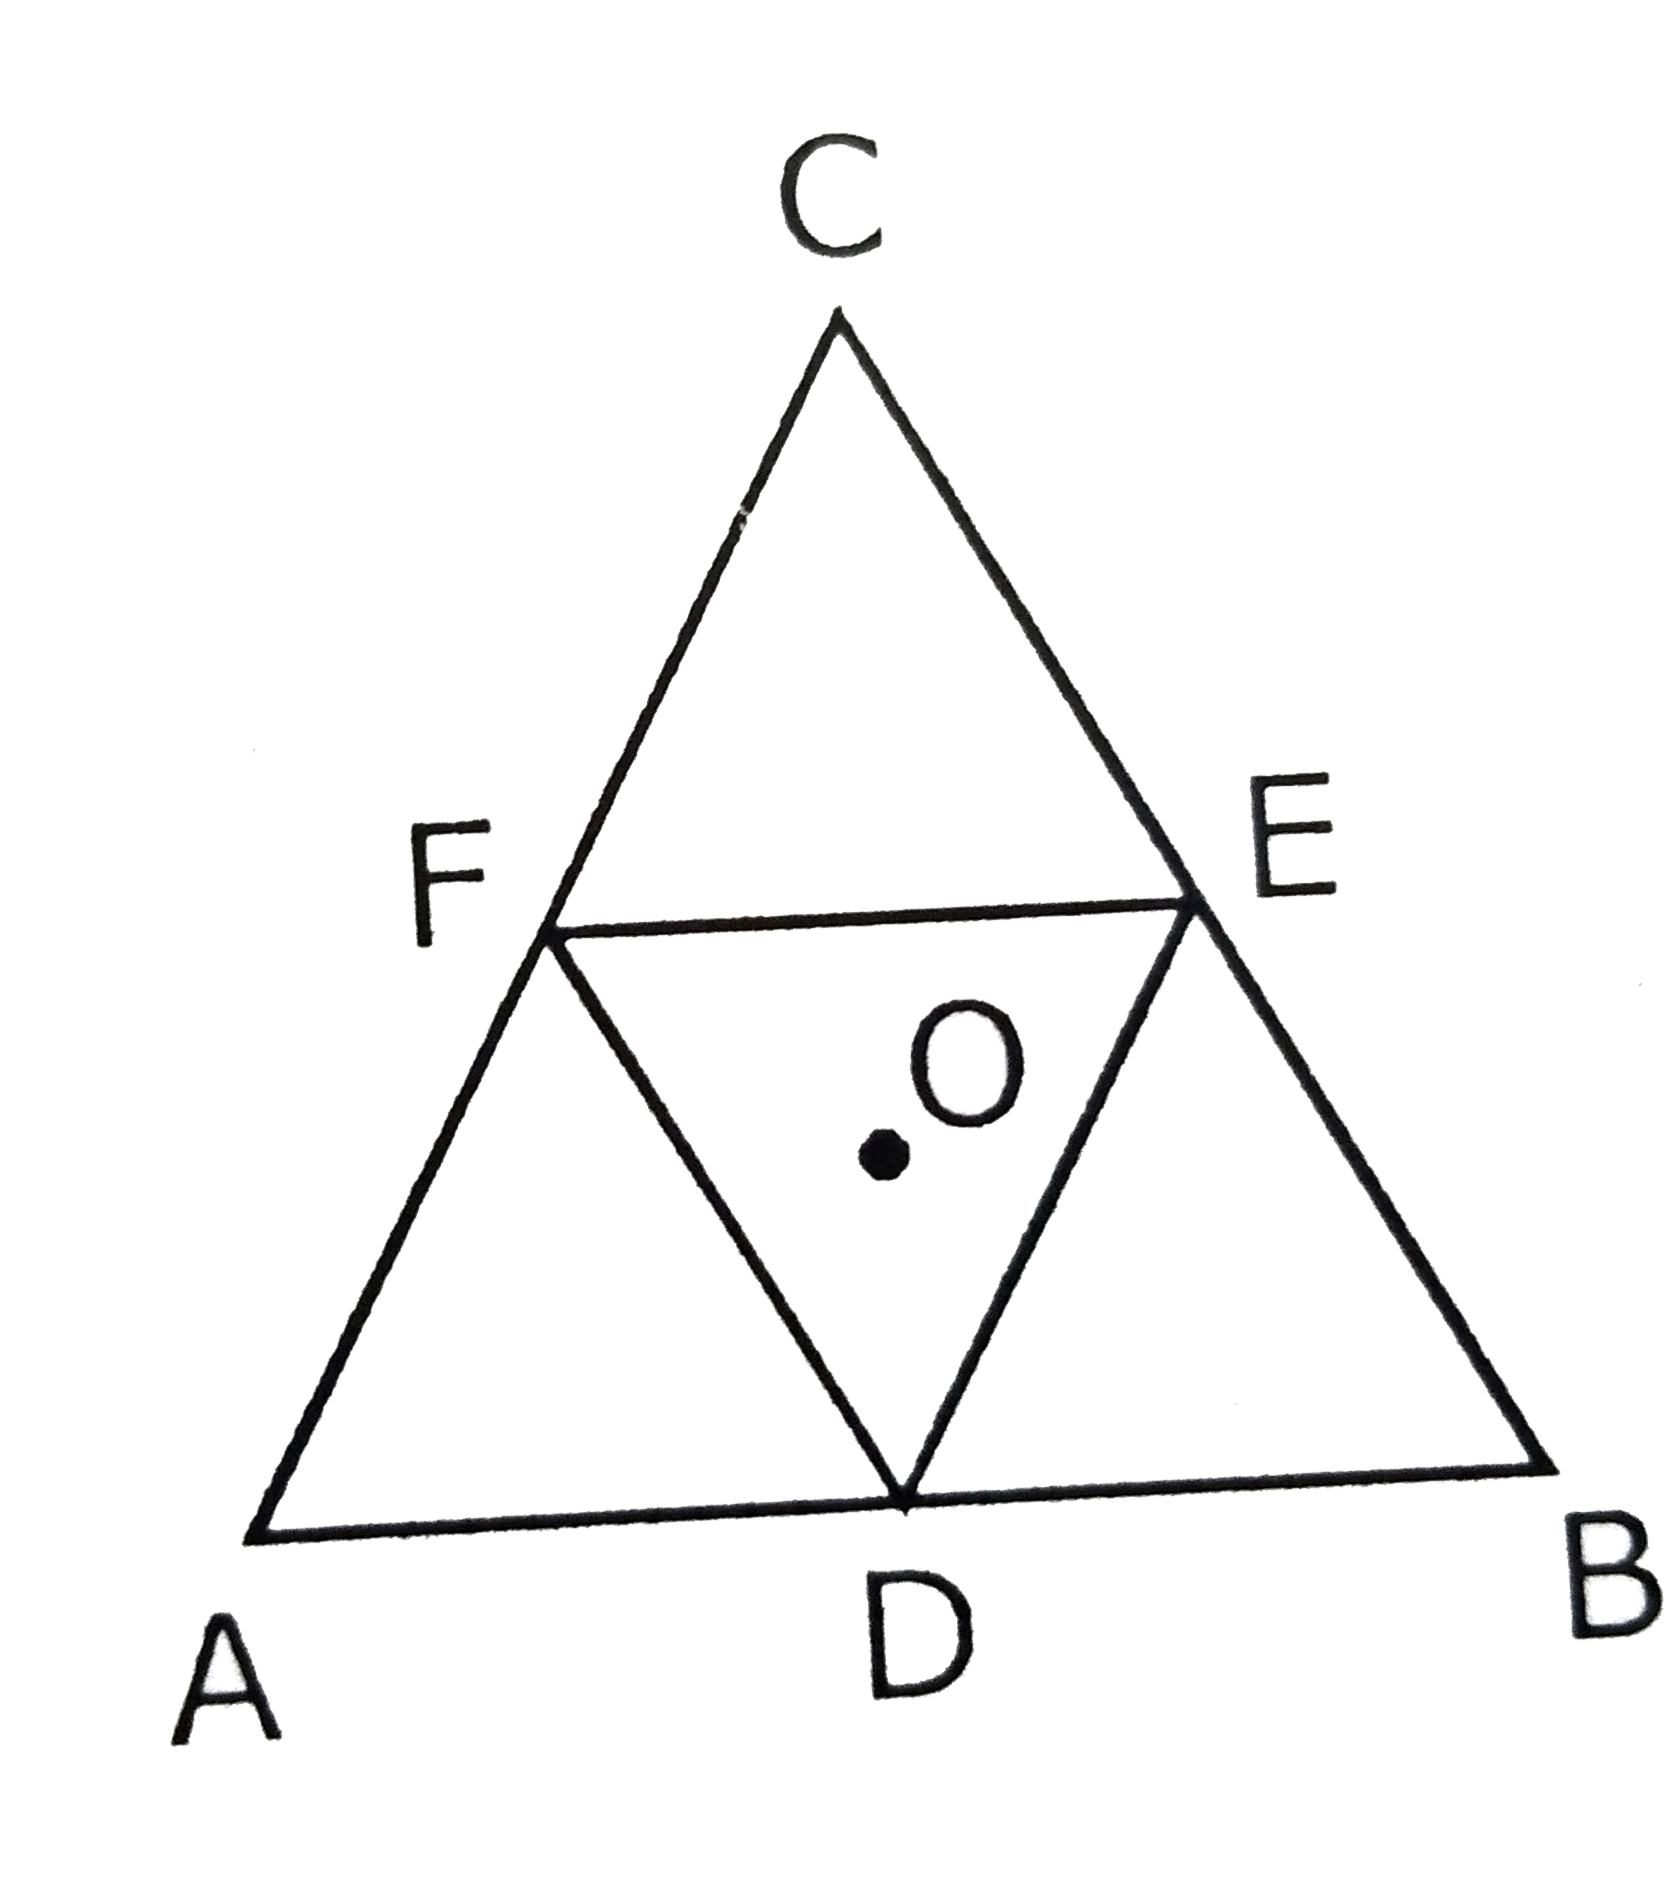 Moment of inertia of an equilateral triangular lamina ABC, about the axis passing through its centre O and perpendicular to its plane is I(0)  as shown in the figure. A cavity DEF is cut out from the lamina, where D,E,F are the mid points of the sides. Moment of inertia of the remaining part of lamina about the same axis is -